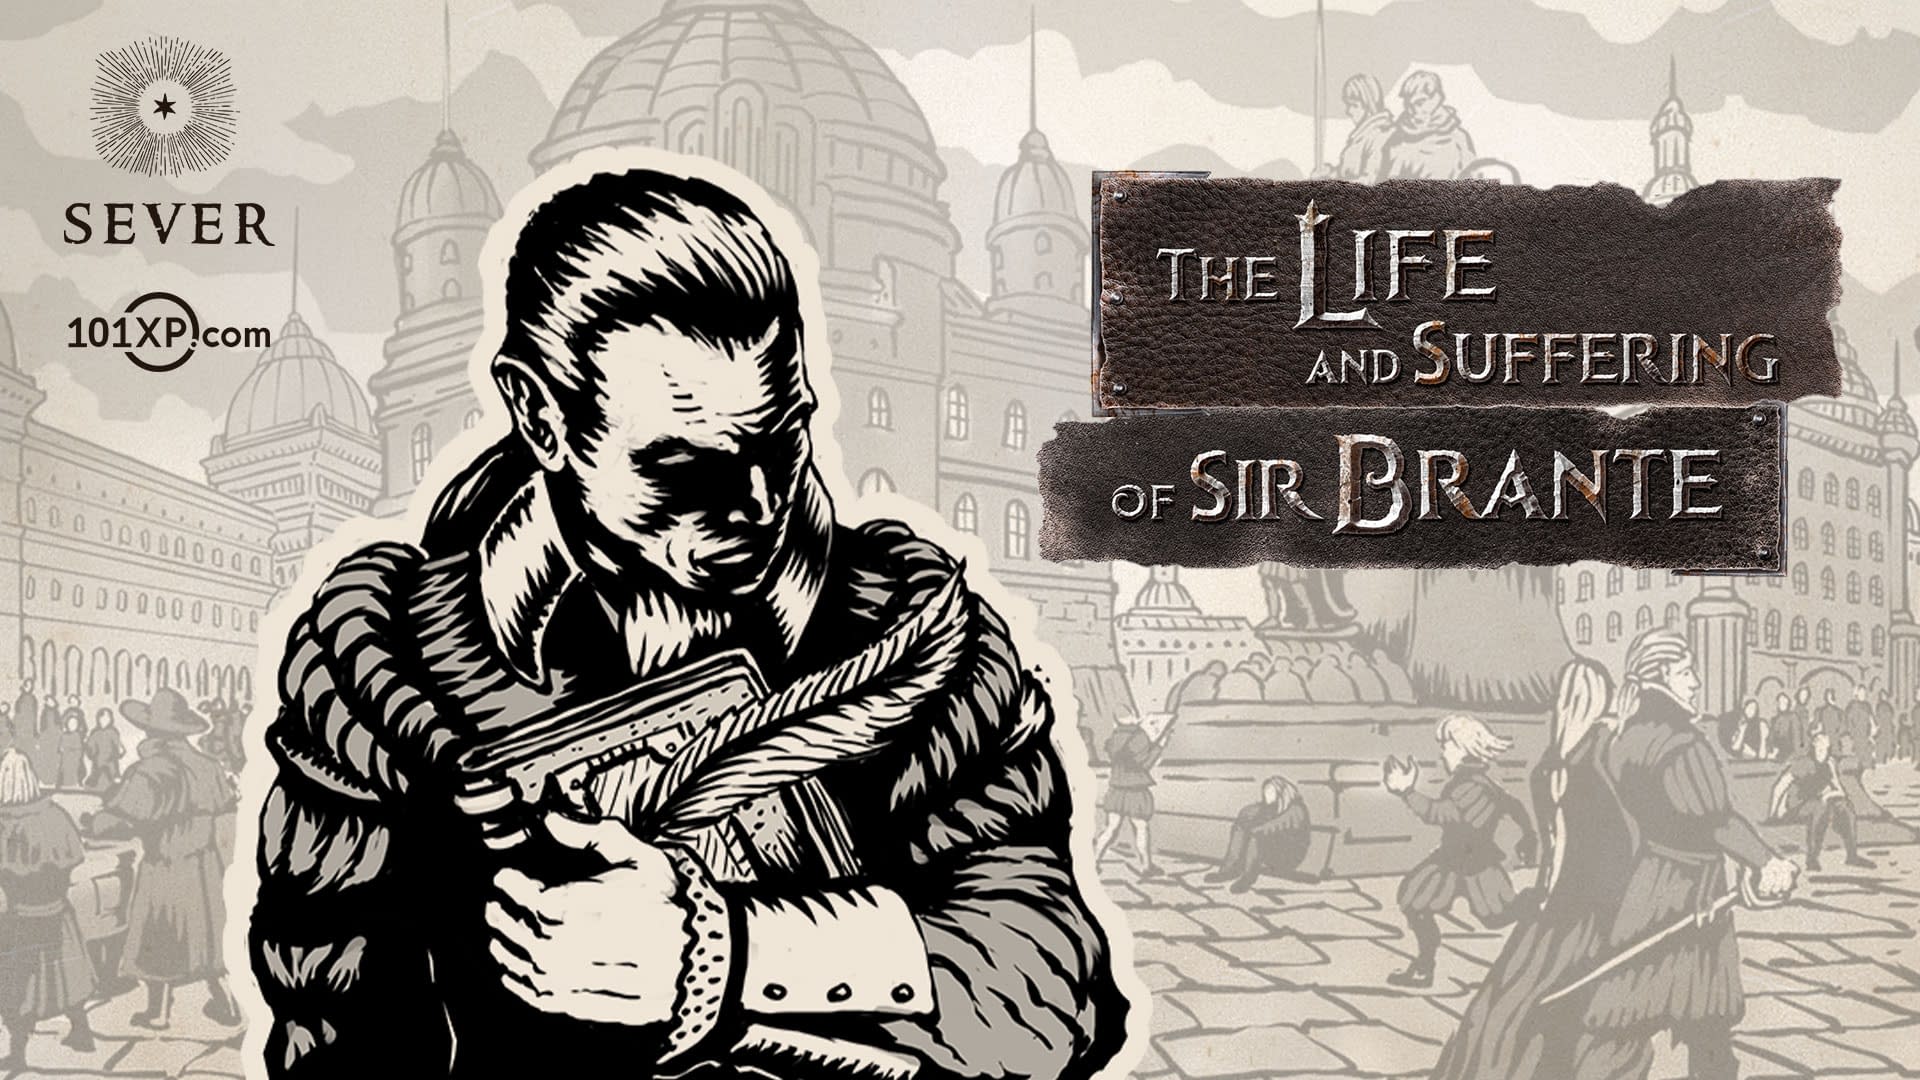 the-life-and-suffering-of-sir-brante-is-now-on-steam